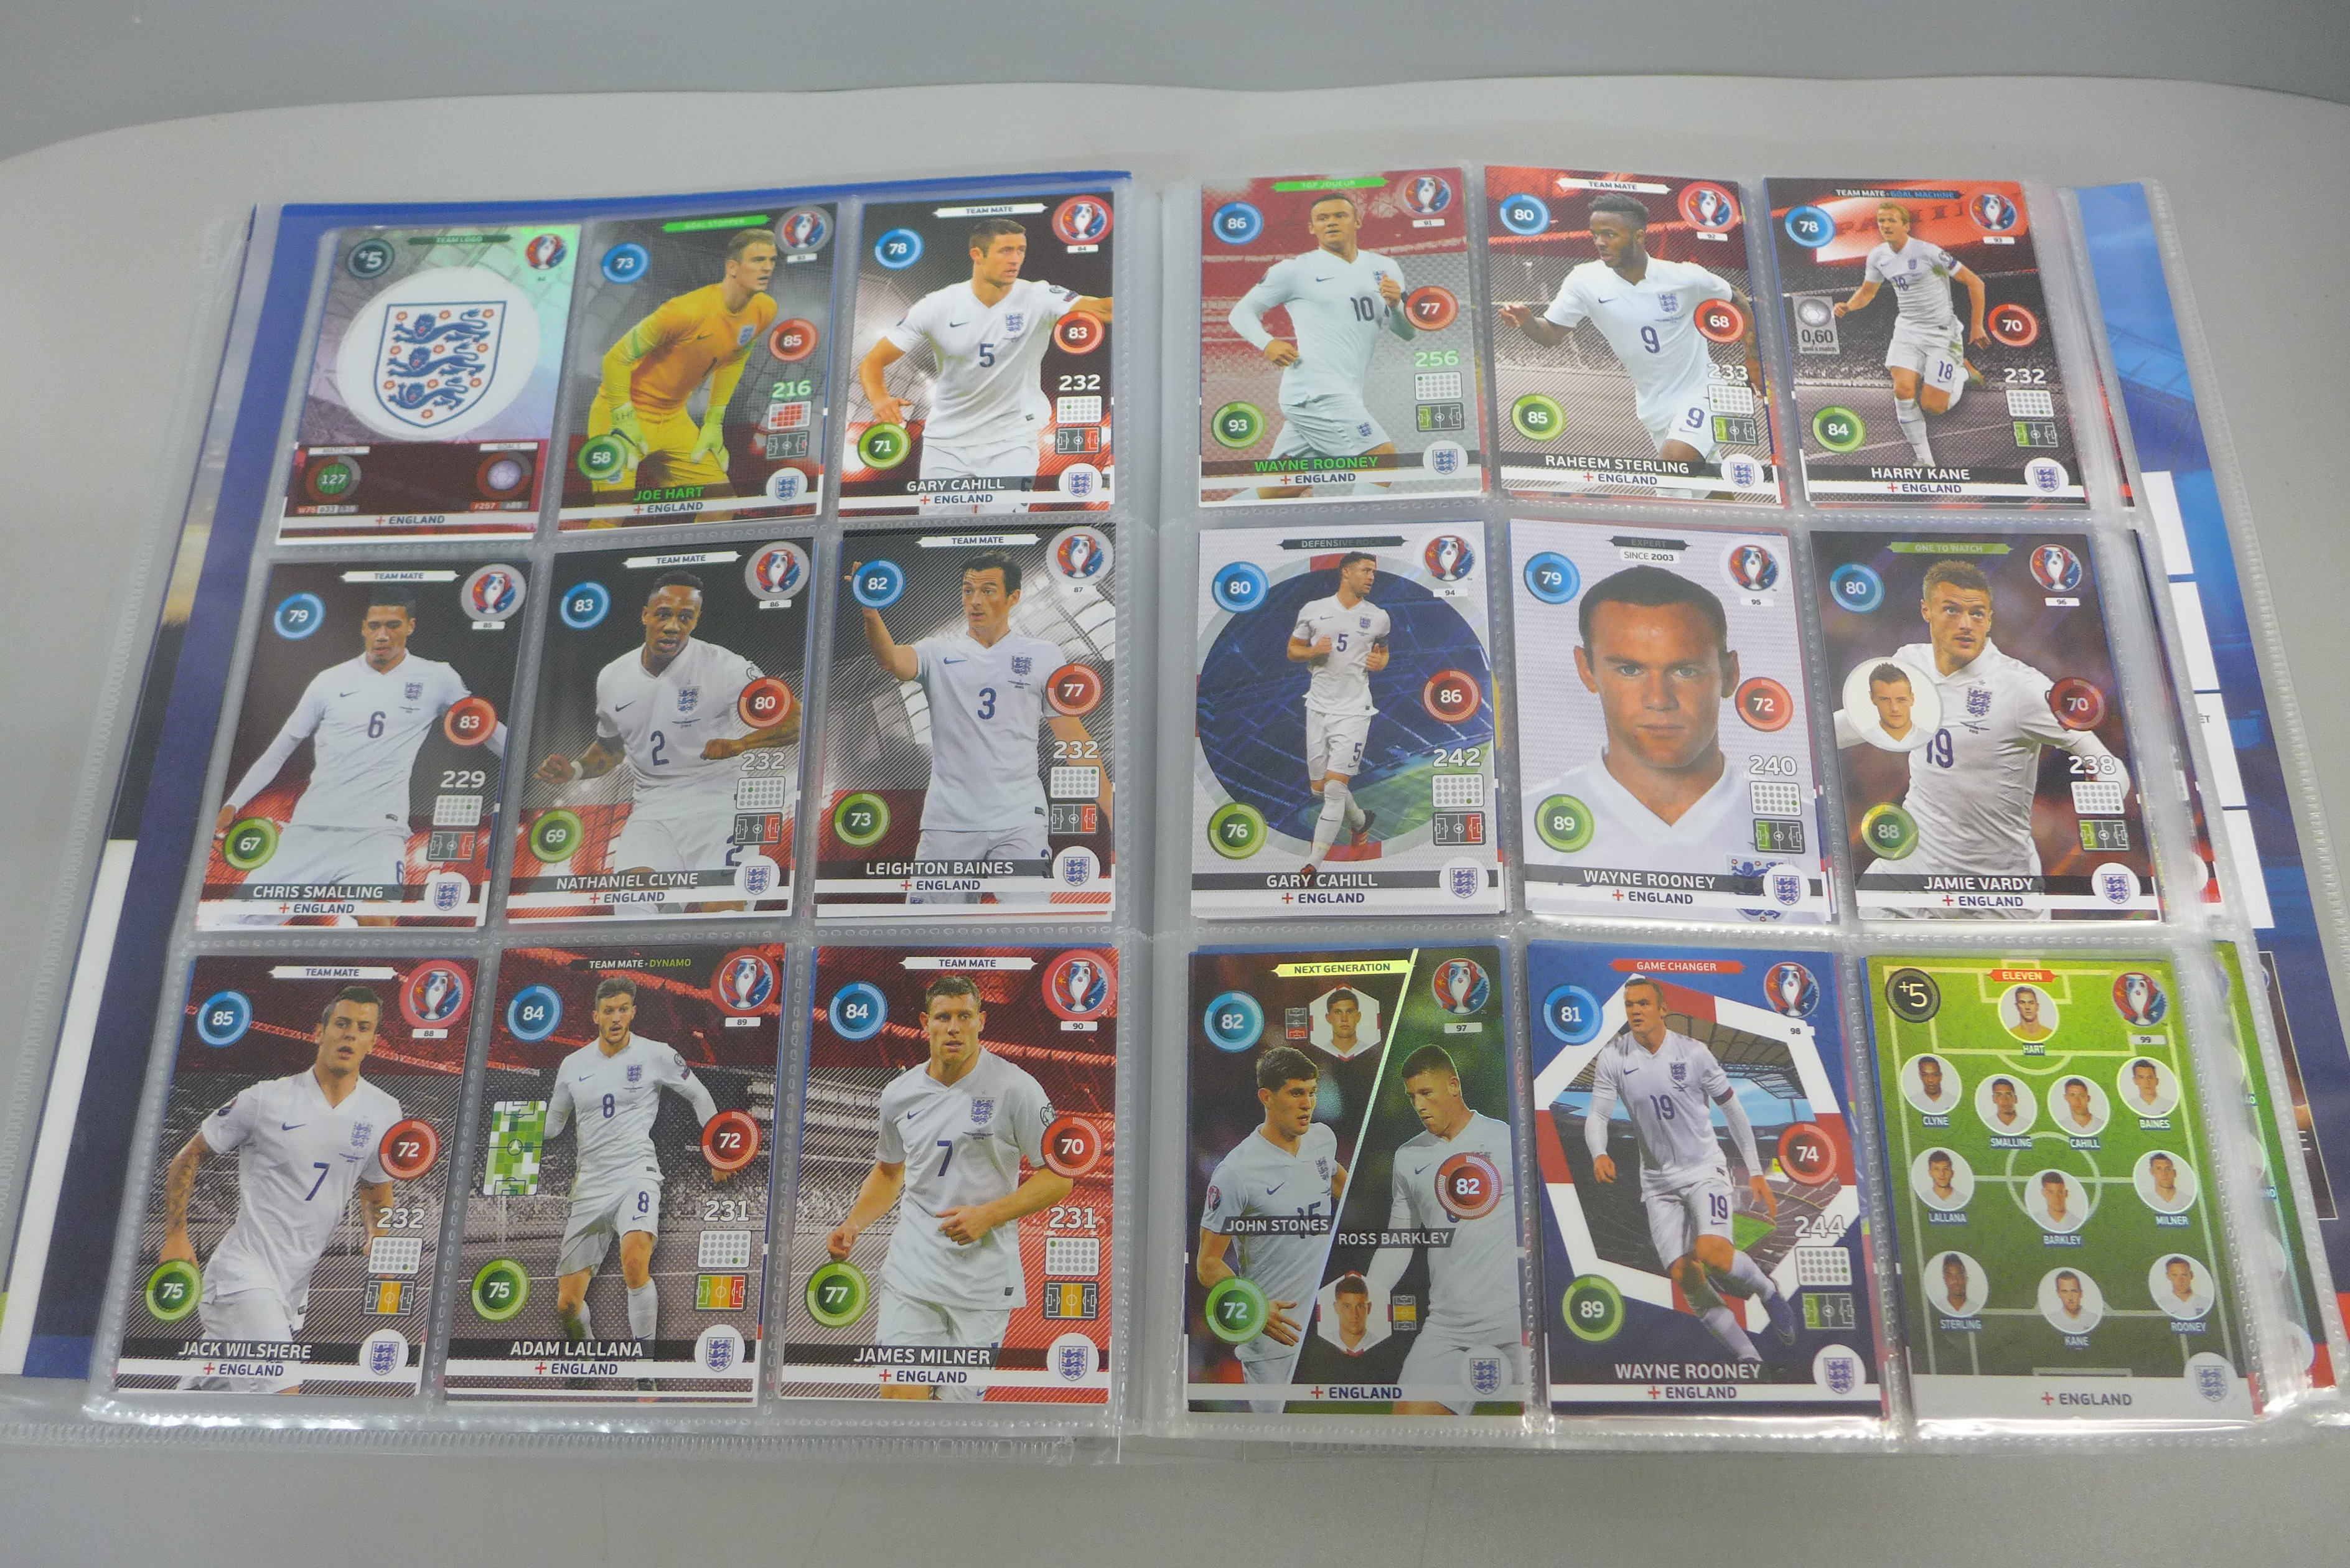 Euro 2016 Panini trading cards and album - Image 2 of 4